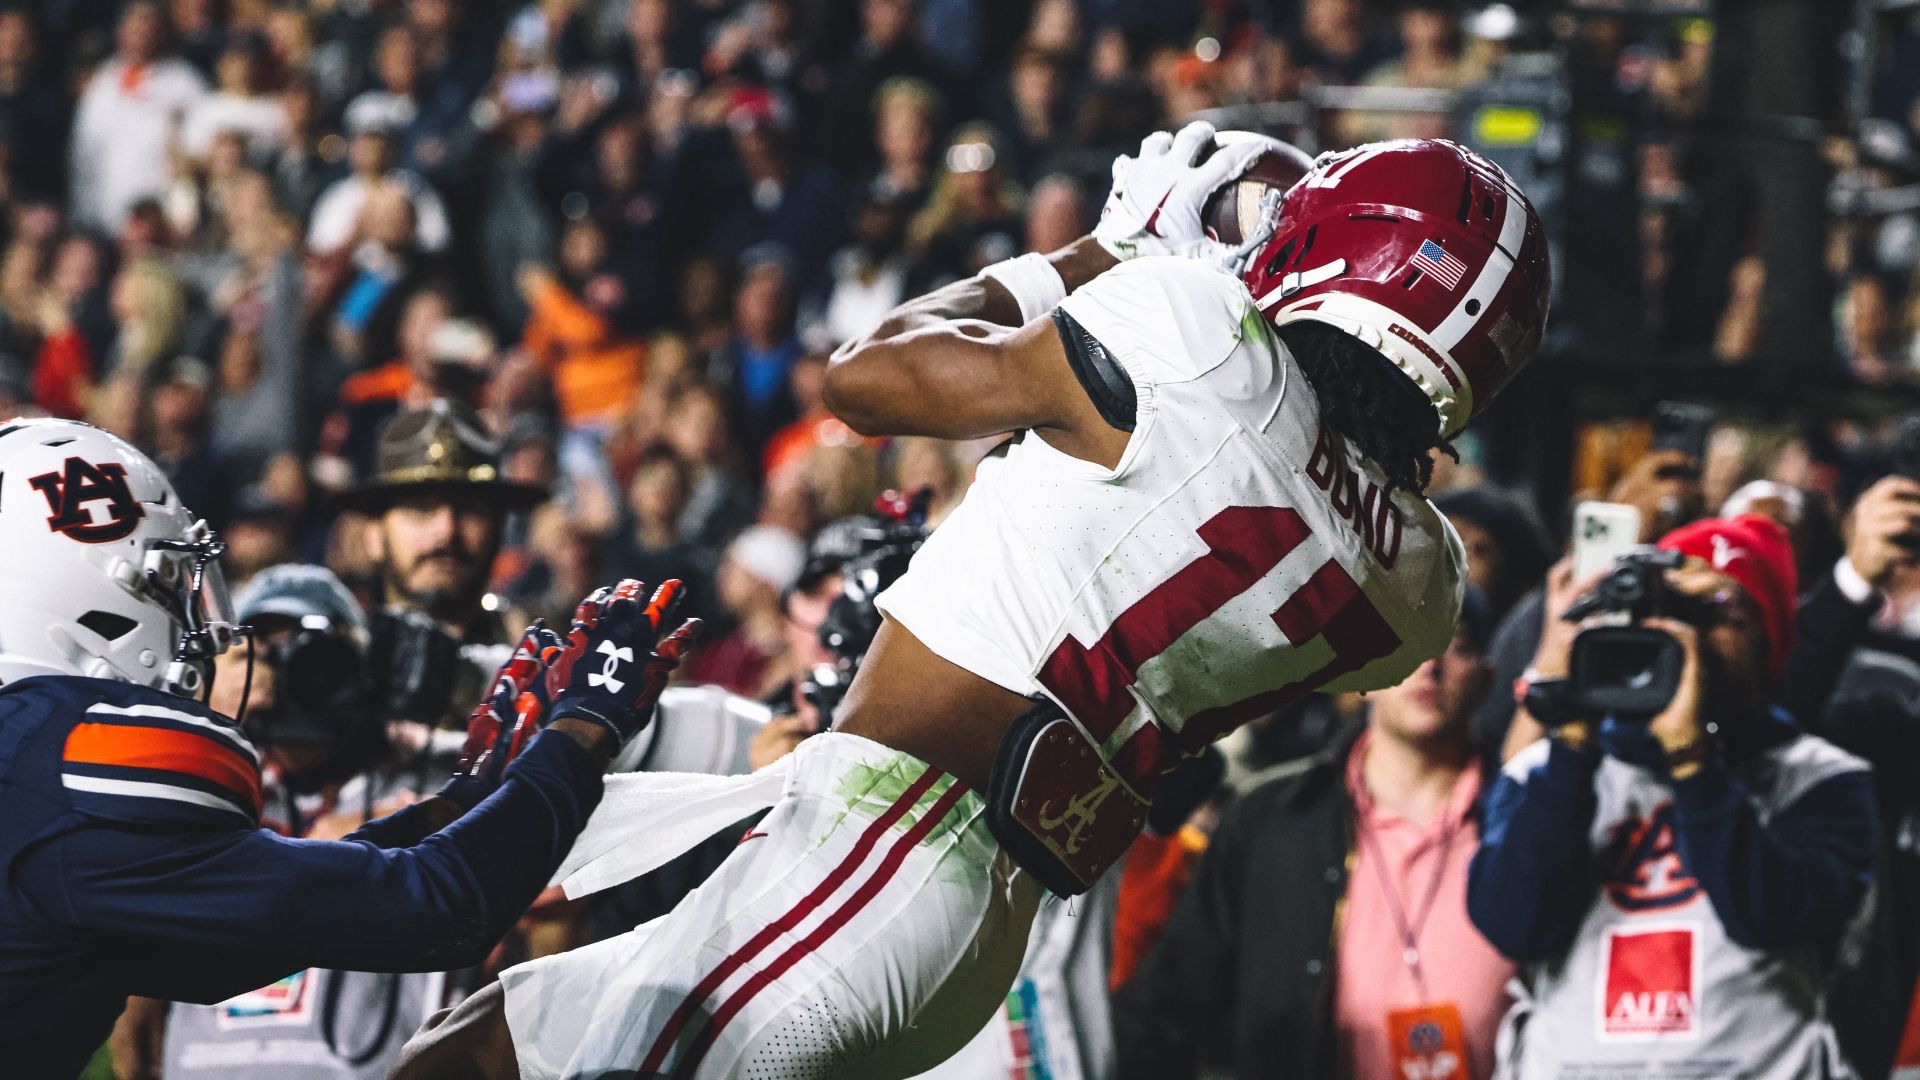 Iron Bowl's 'Gravedigger' play: Never count out Bama